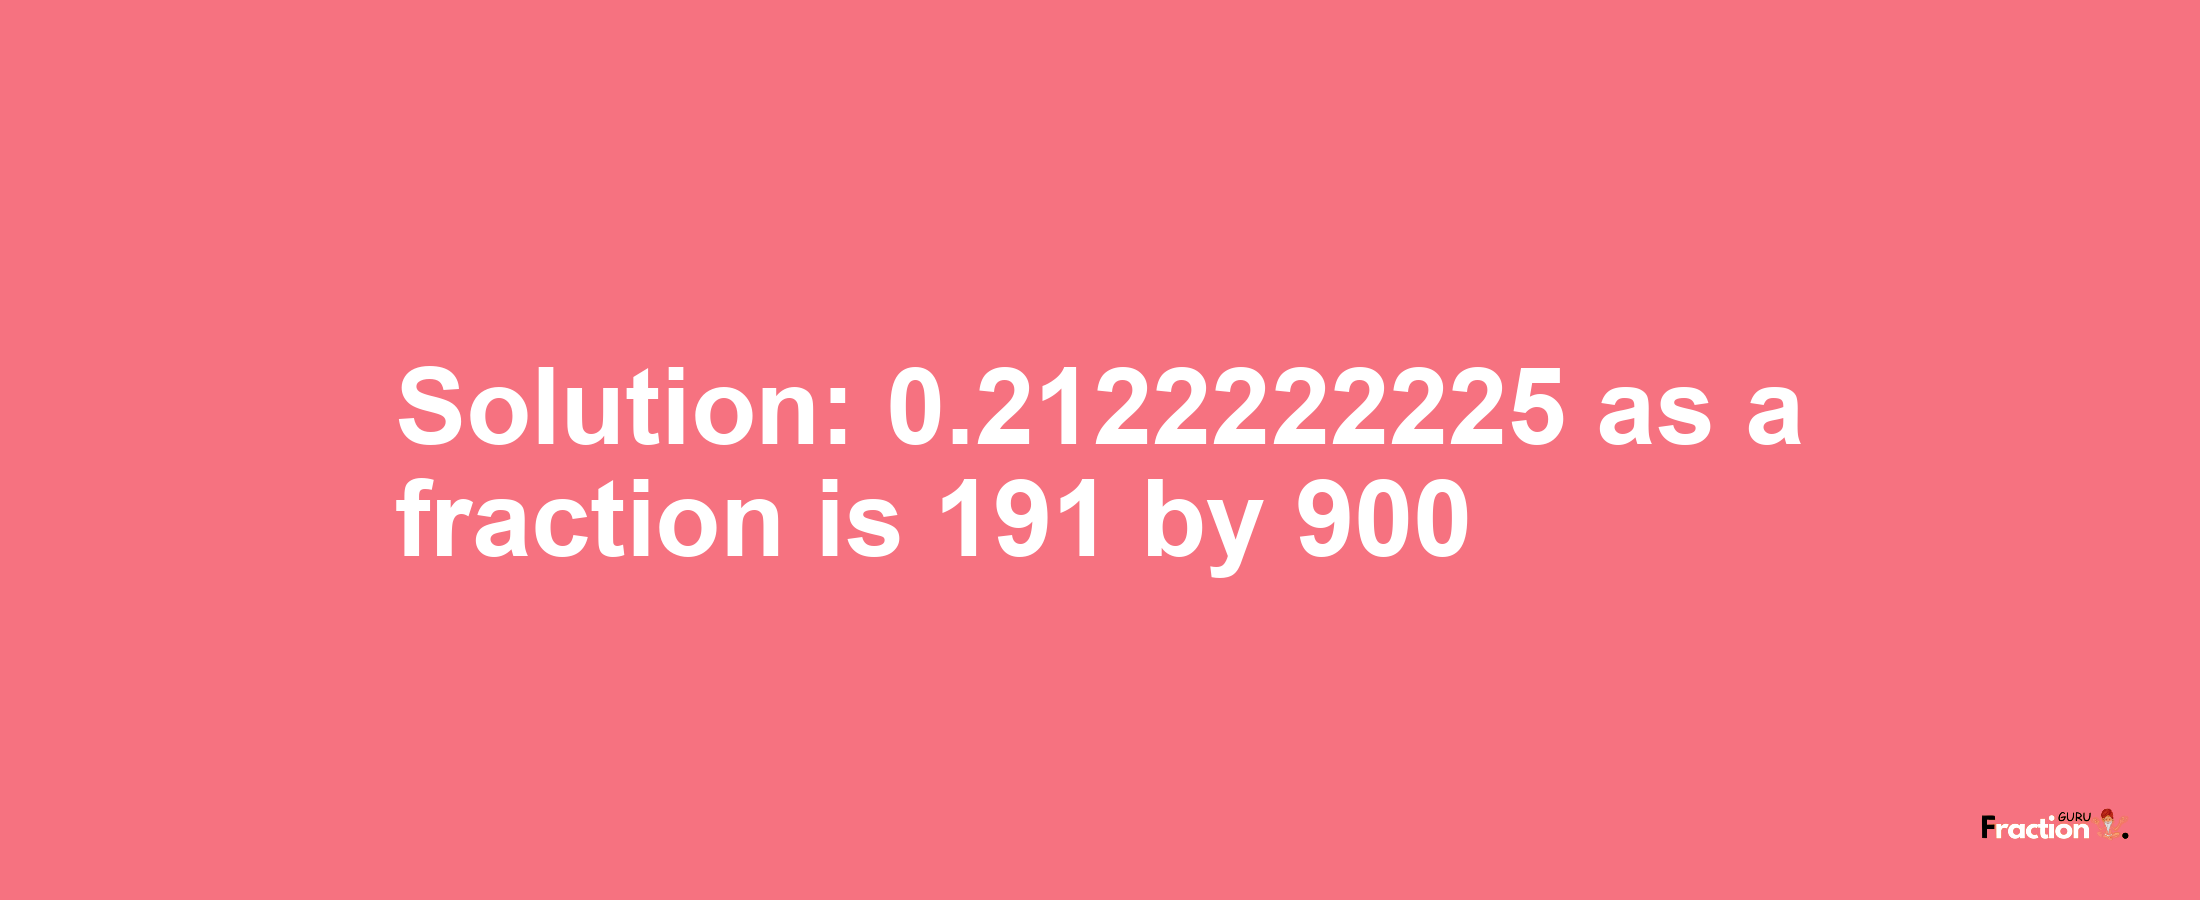 Solution:0.2122222225 as a fraction is 191/900